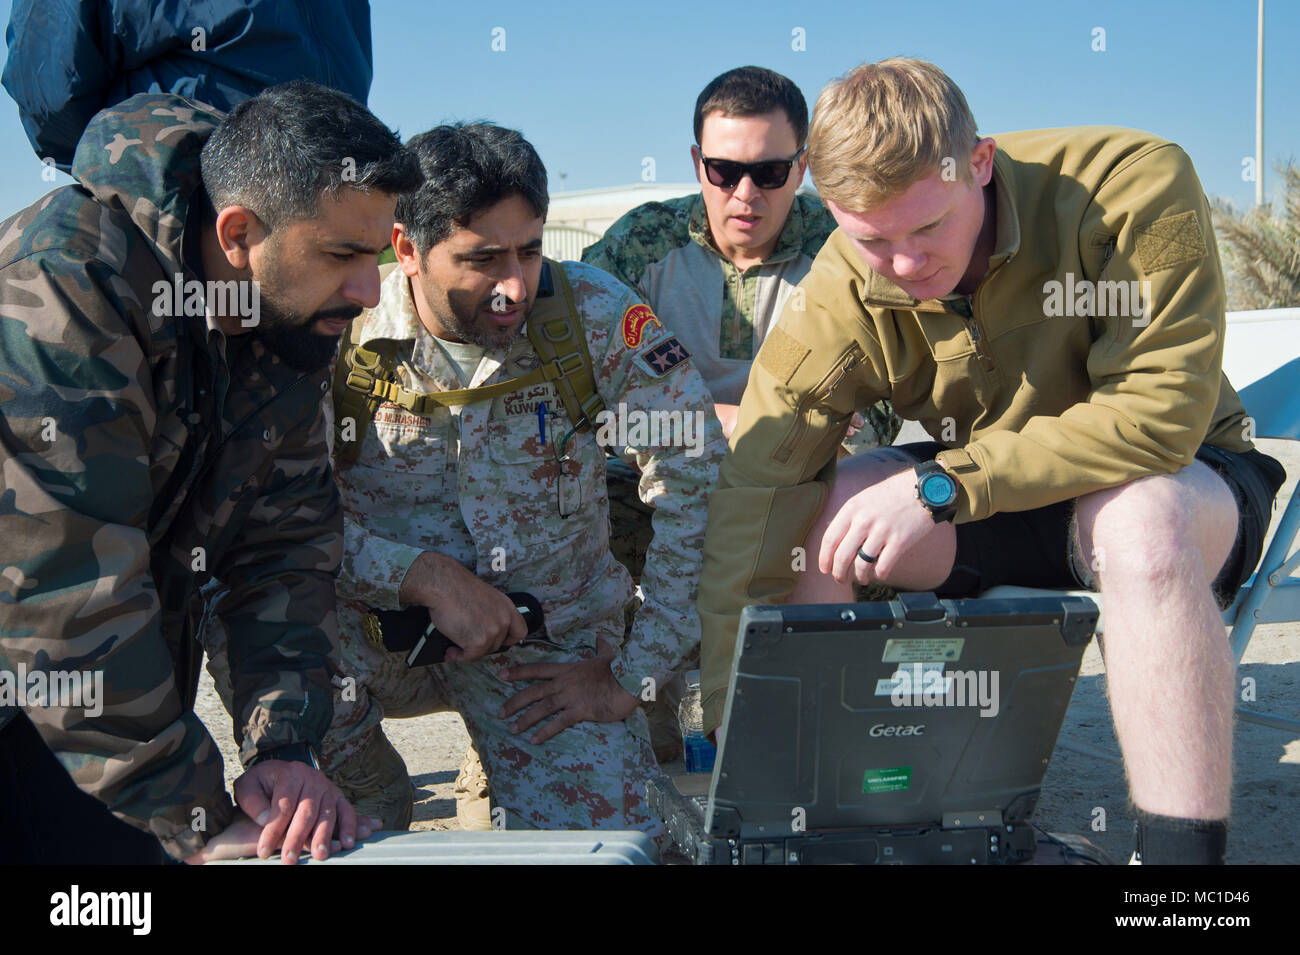 180109-N-XE158-0008 Mohammed Al-Ahmad Naval Base, KUWAIT (Jan. 9, 2018) Mineman 2nd Class Dylan Duncan, assigned to Commander, Task Group 56.1, demonstrates pre-mission checks on an unmanned underwater vehicle to Kuwait Naval Force explosive ordnance disposal technicians during a training evolution as part of exercise Eager Response 18. Eager Response 18 is a bilateral explosive ordnance disposal military exercise between the State of Kuwait and the United States. The exercise fortifies military-to-military relationships between the Kuwait Naval Force and U.S. Navy, advances the operational ca Stock Photo